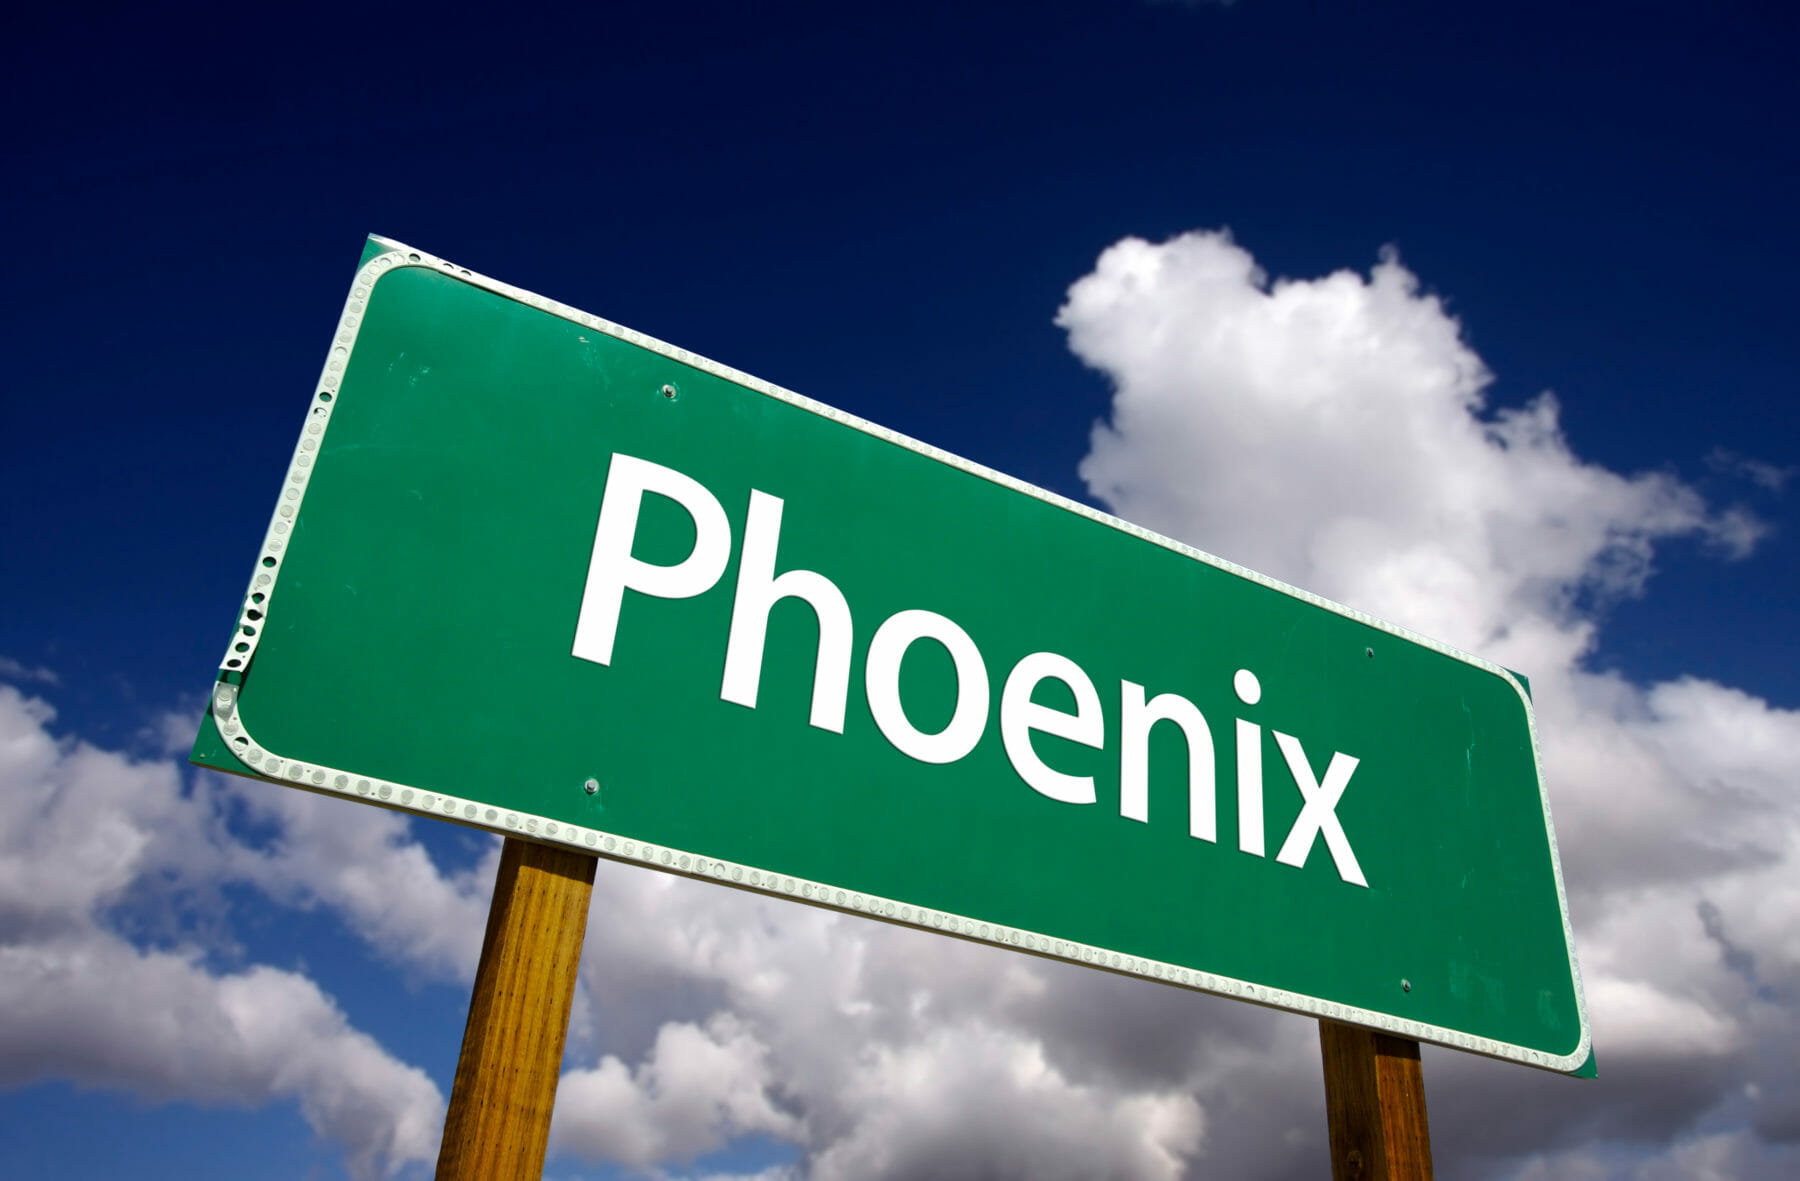 List of Top Phoenix Employers - Job Seekers Blog - JobStars Resume Writing Services and Career Coaching